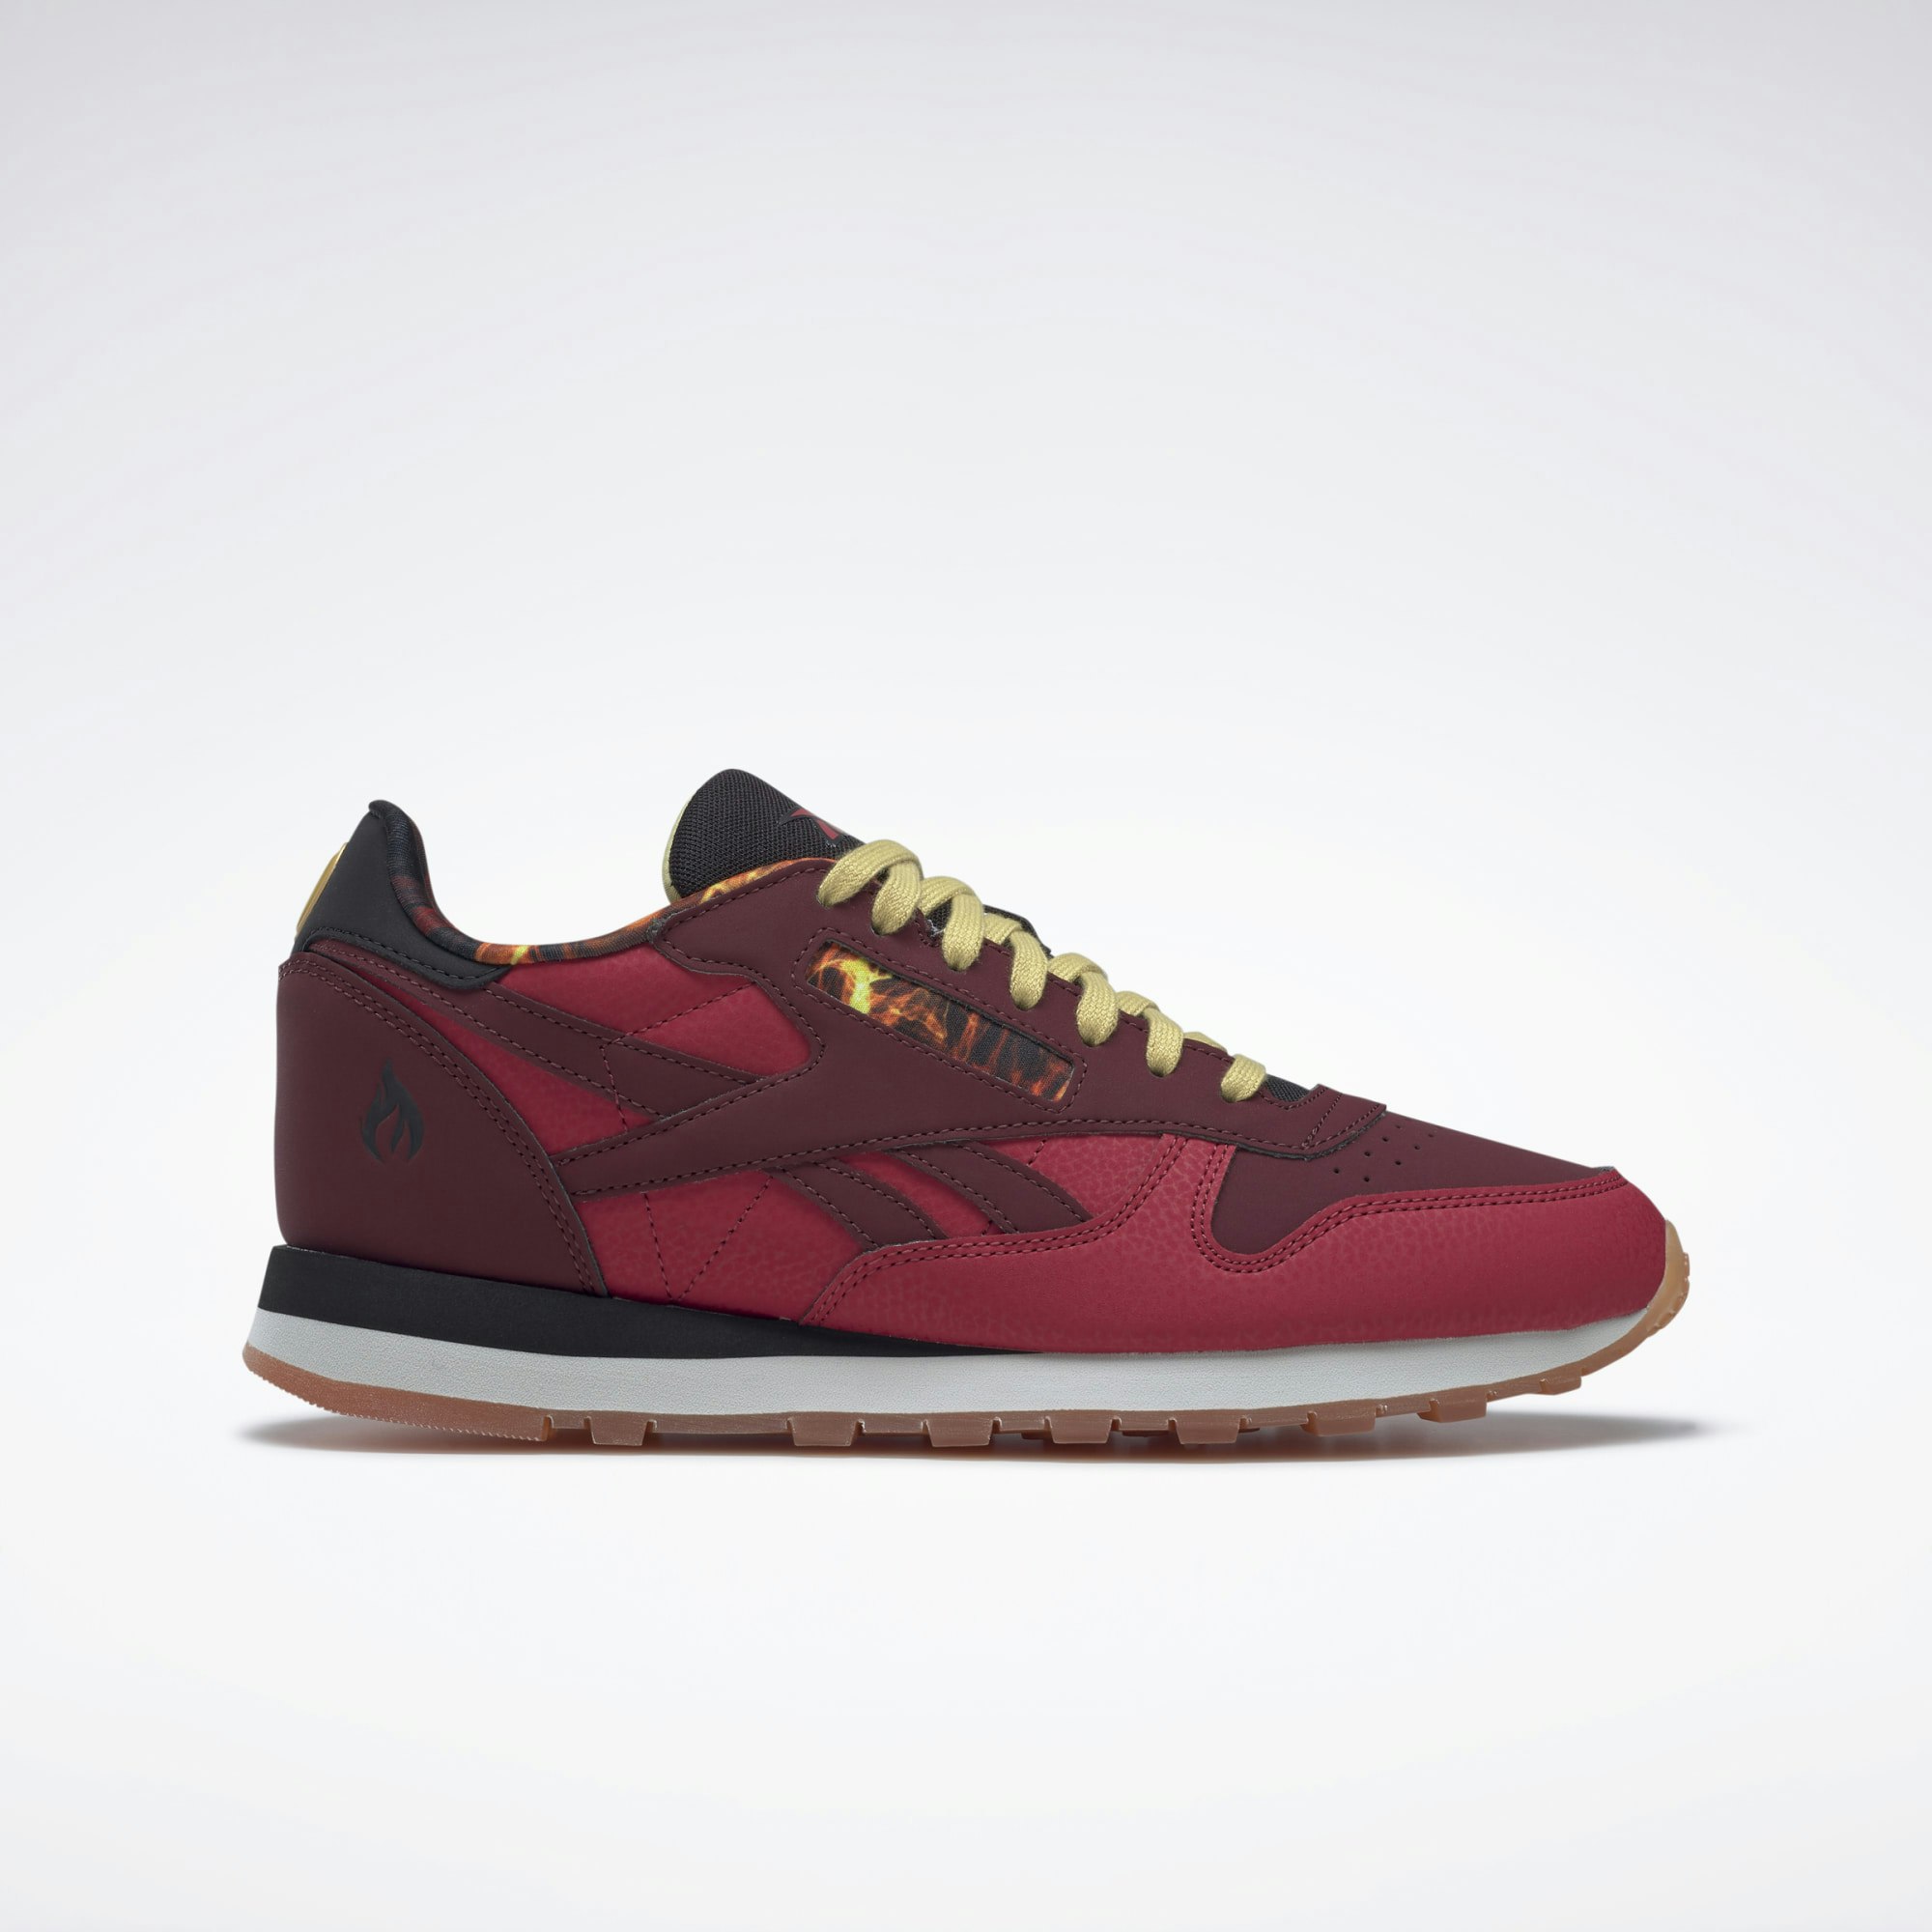 Street Fighter x Reebok Classic Leather "Gill"